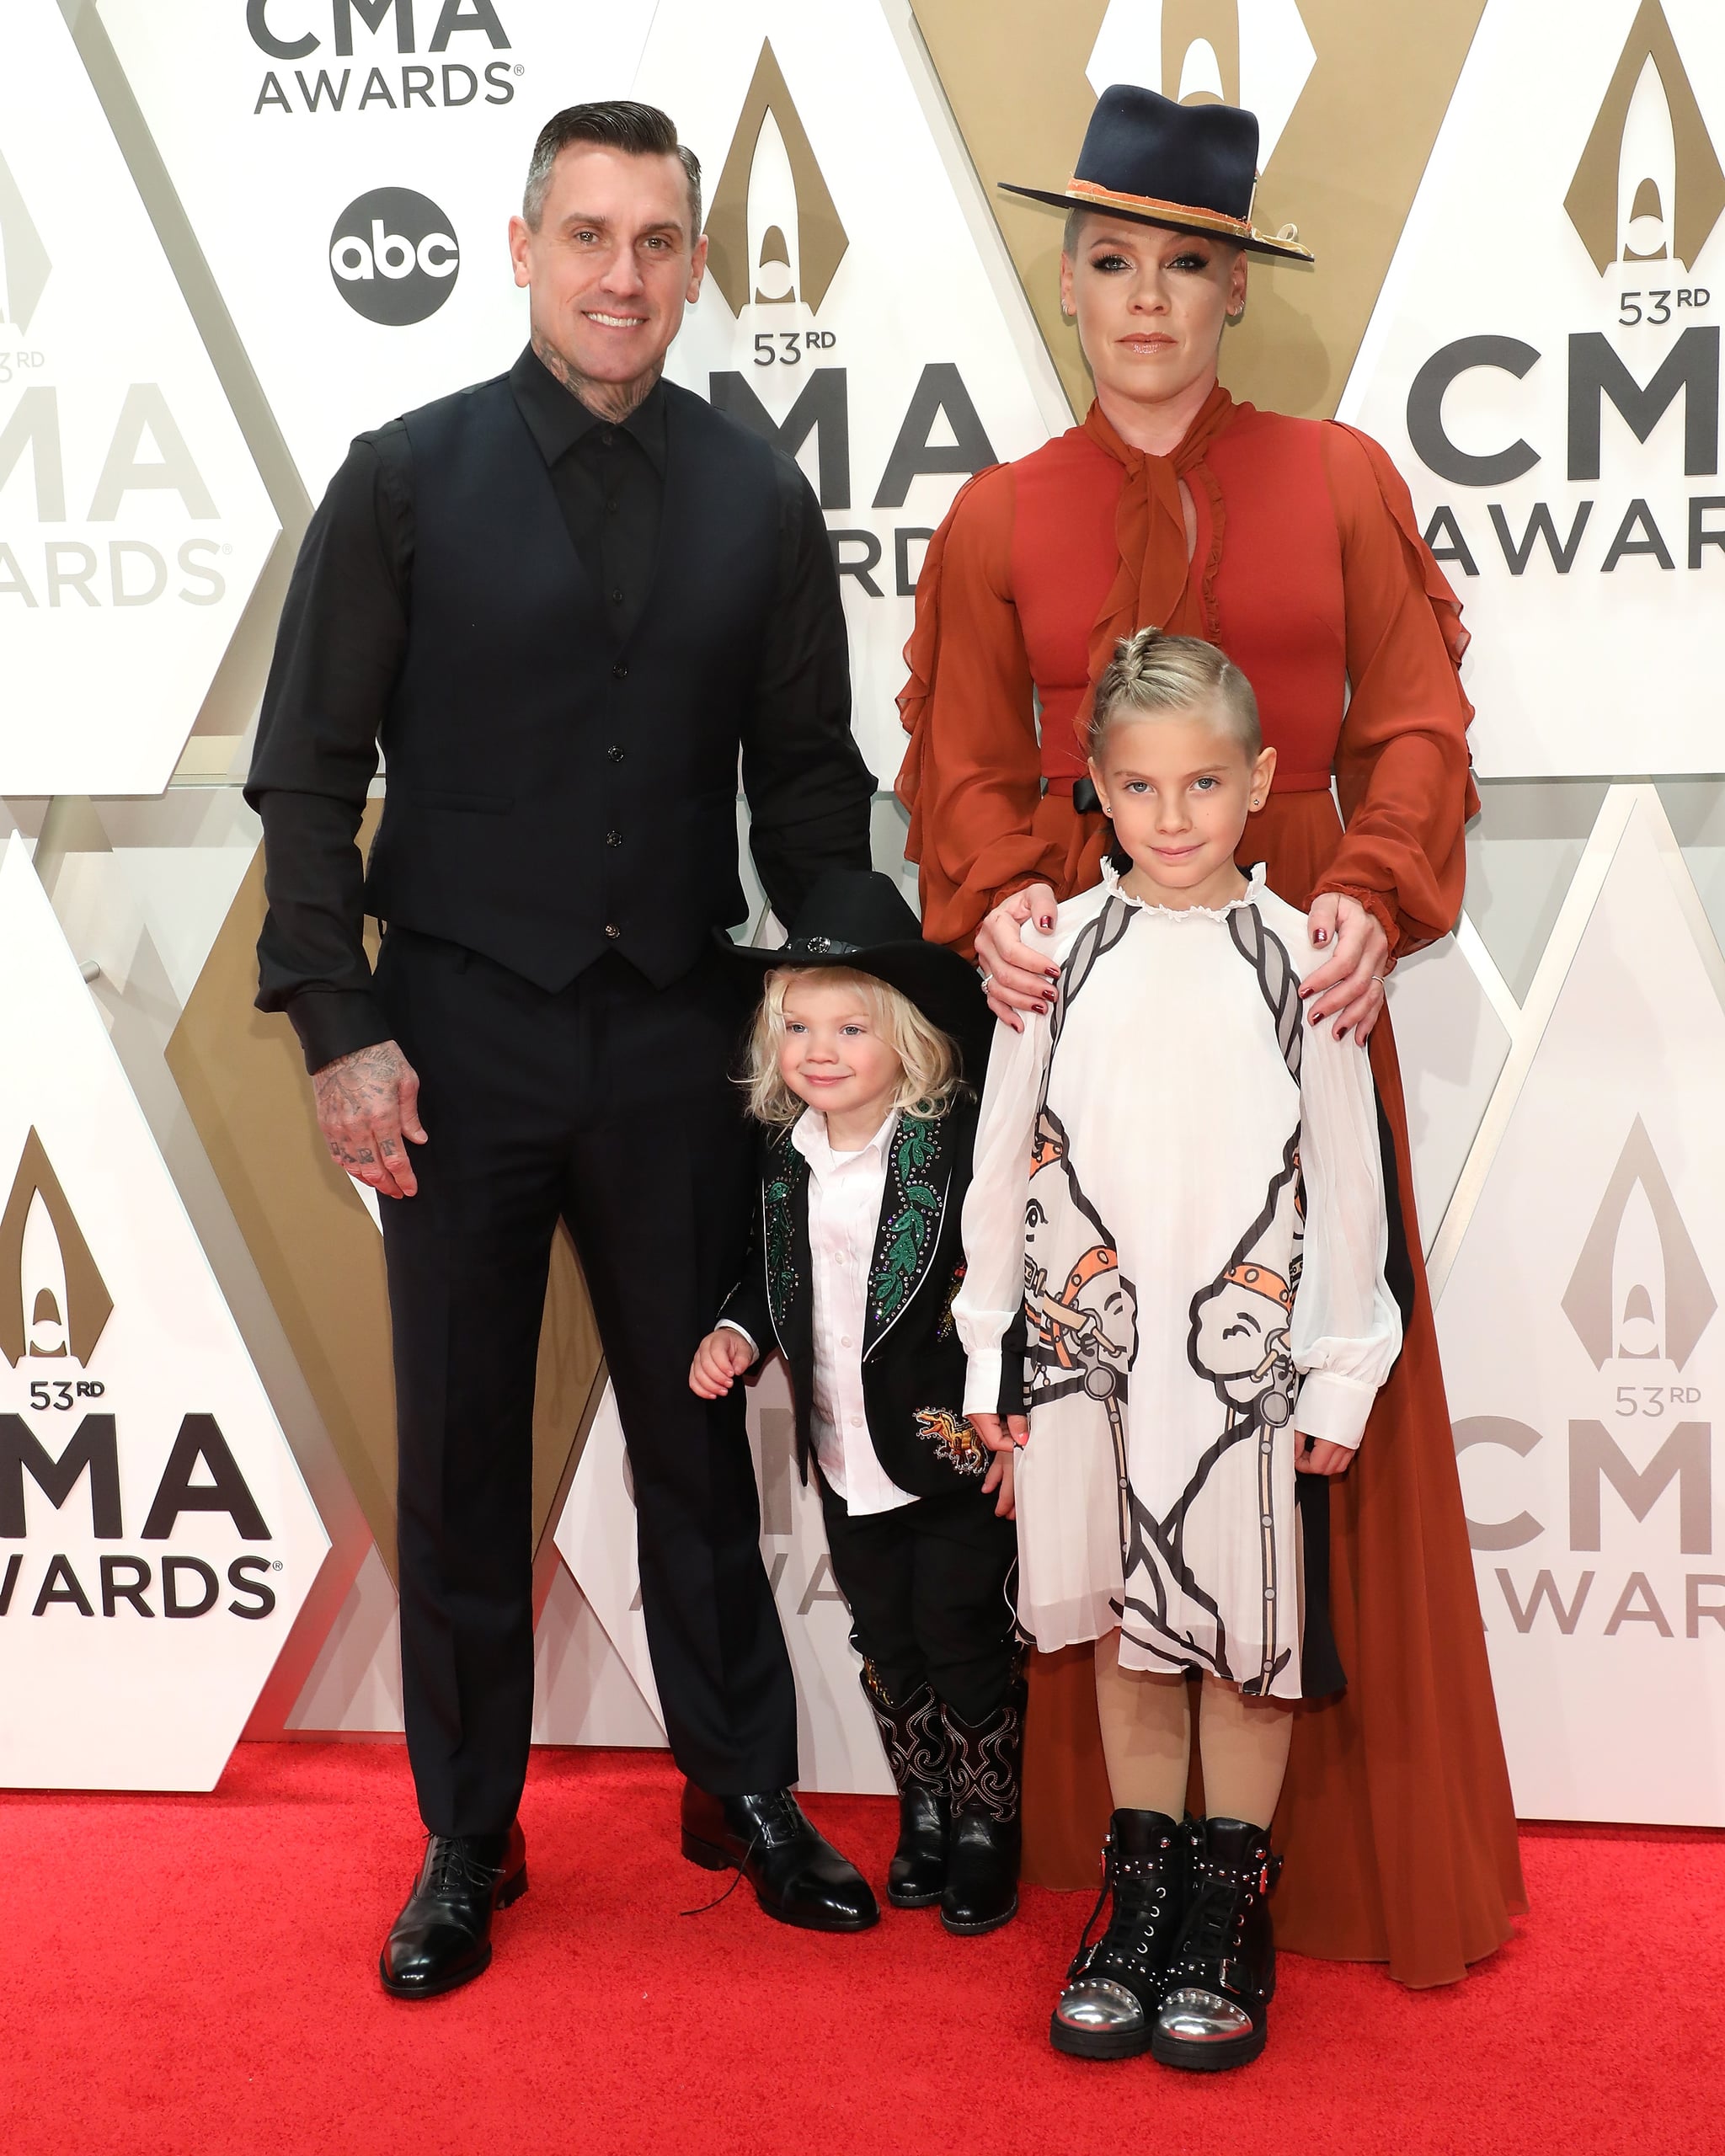 NASHVILLE, TENNESSEE - NOVEMBER 13: (FOR EDITORIAL USE ONLY)  Carey Hart, P!nk, Jameson Hart, and Willow Hart attend the 53nd annual CMA Awards at Bridgestone Arena on November 13, 2019 in Nashville, Tennessee. (Photo by Taylor Hill/Getty Images)